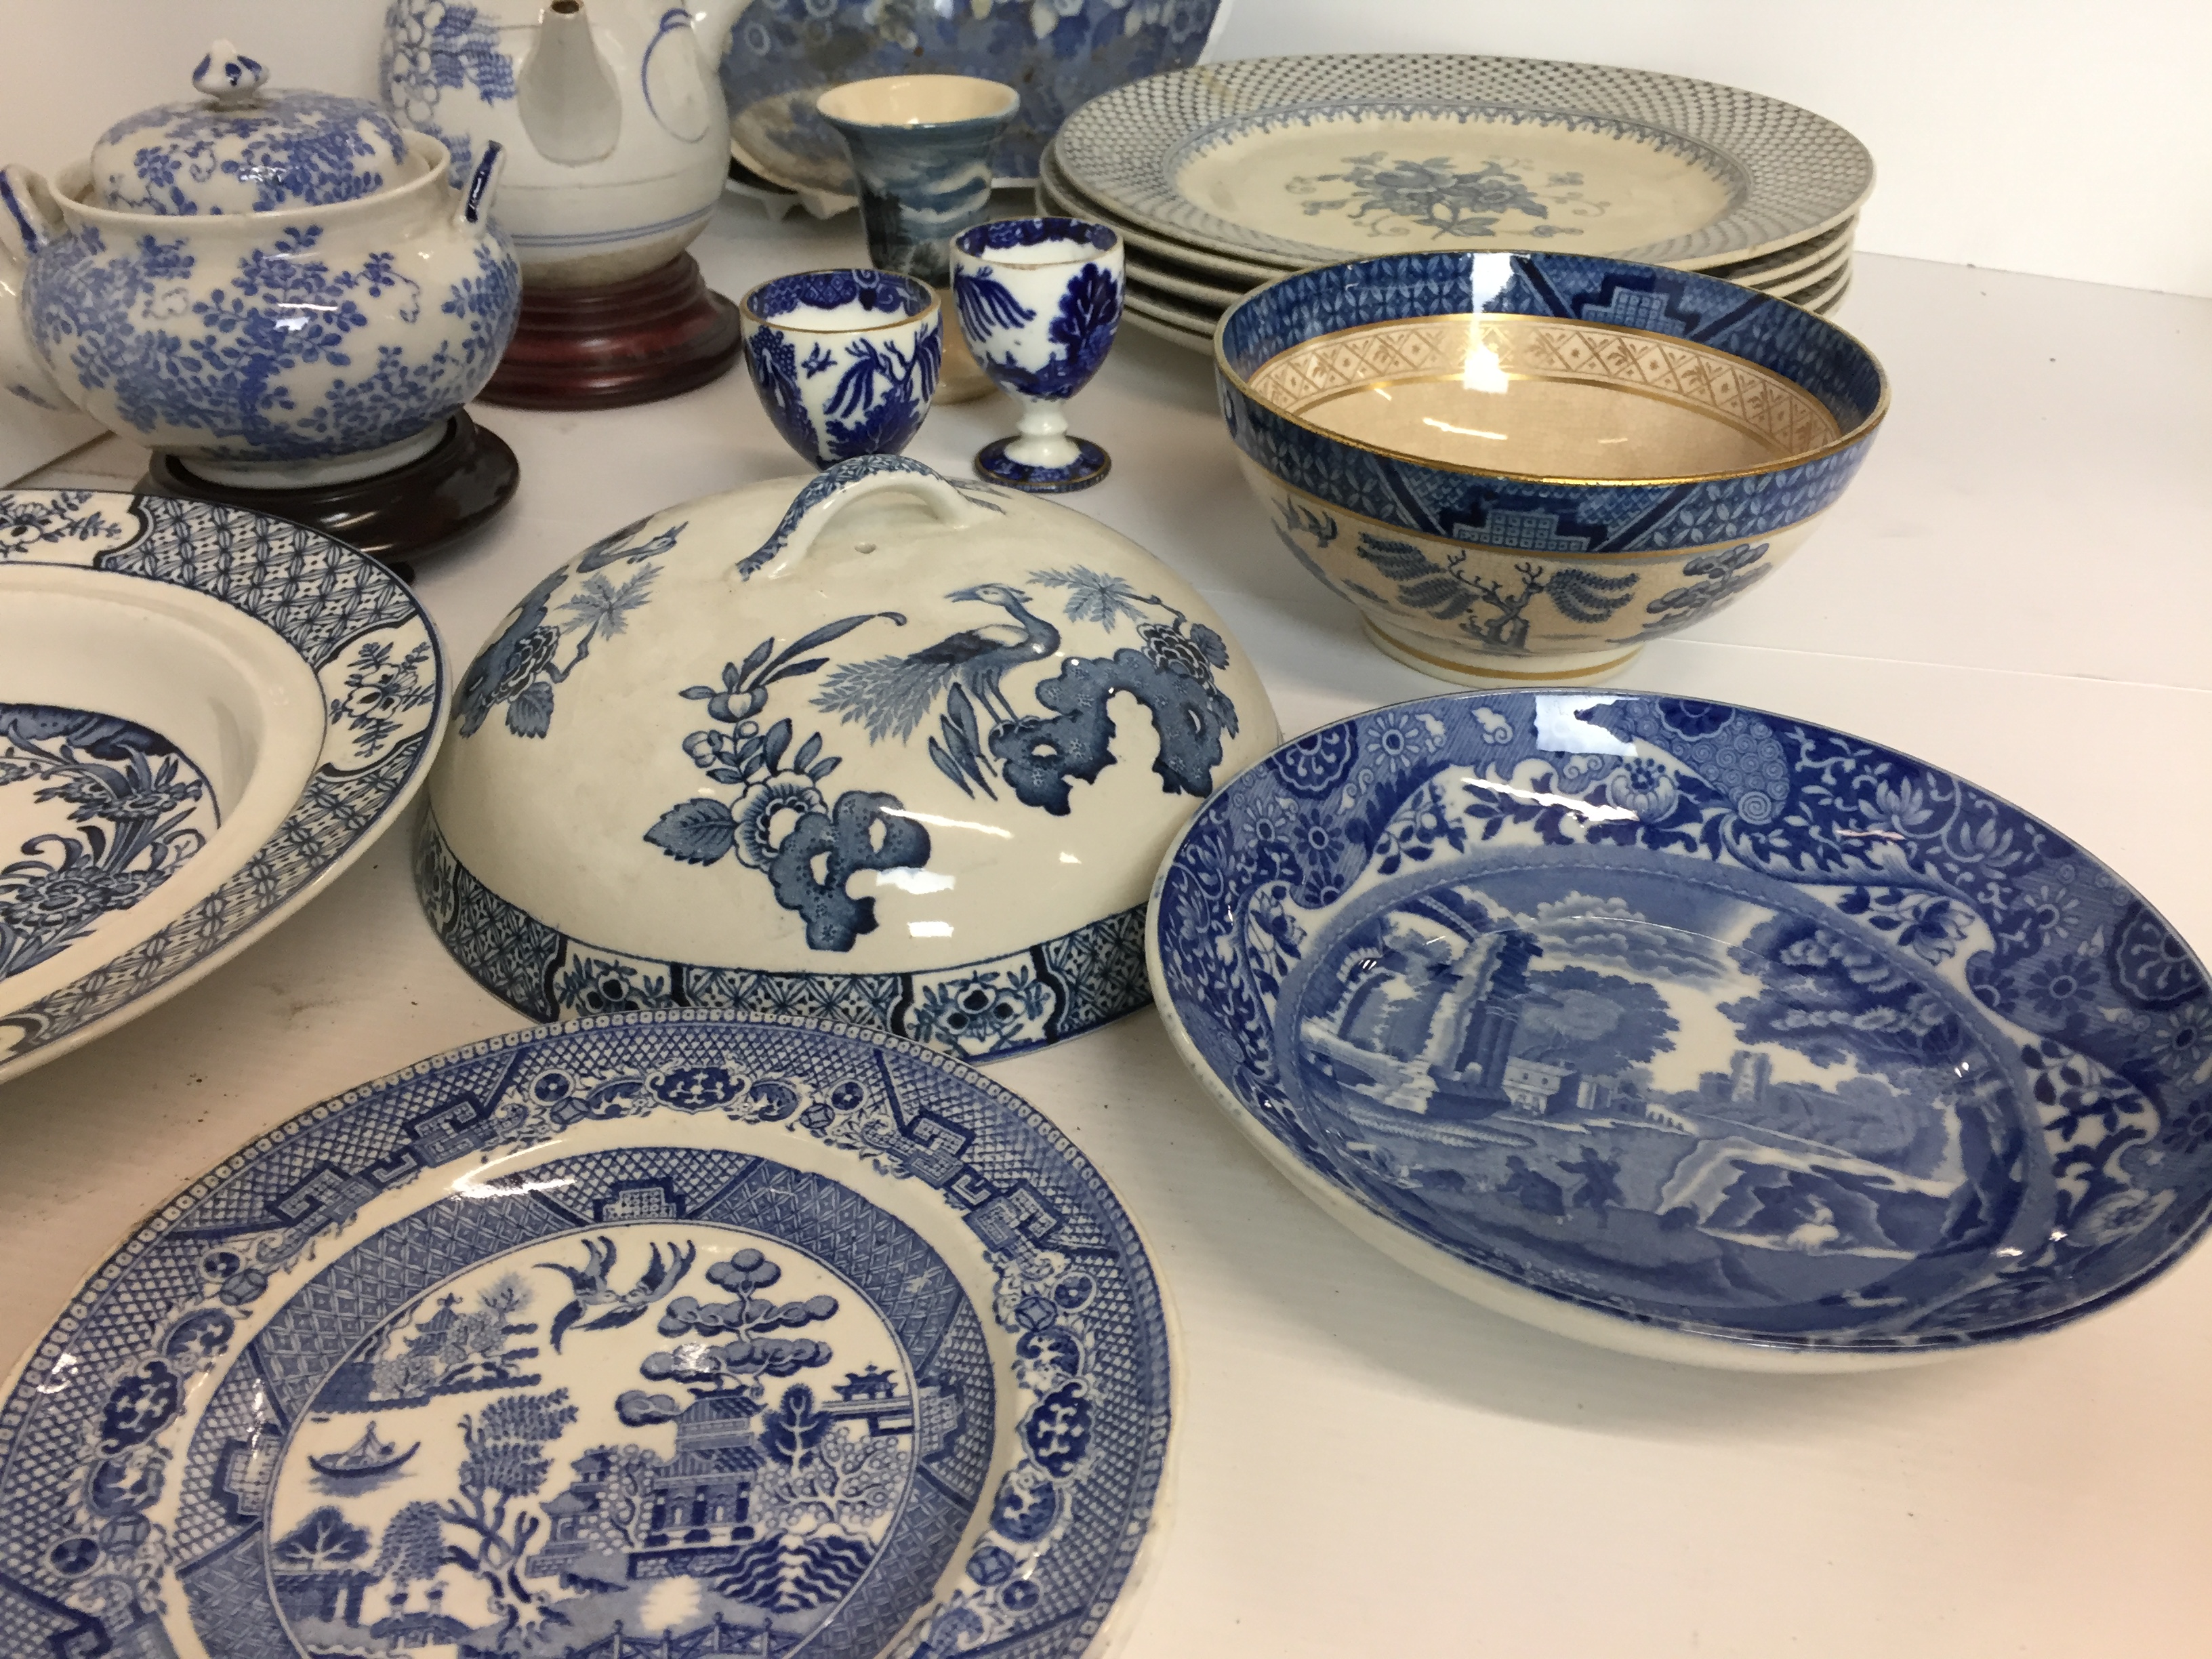 Seventeen pieces of blue and white ware including five Allertons Kempton dinner plates, - Image 4 of 6